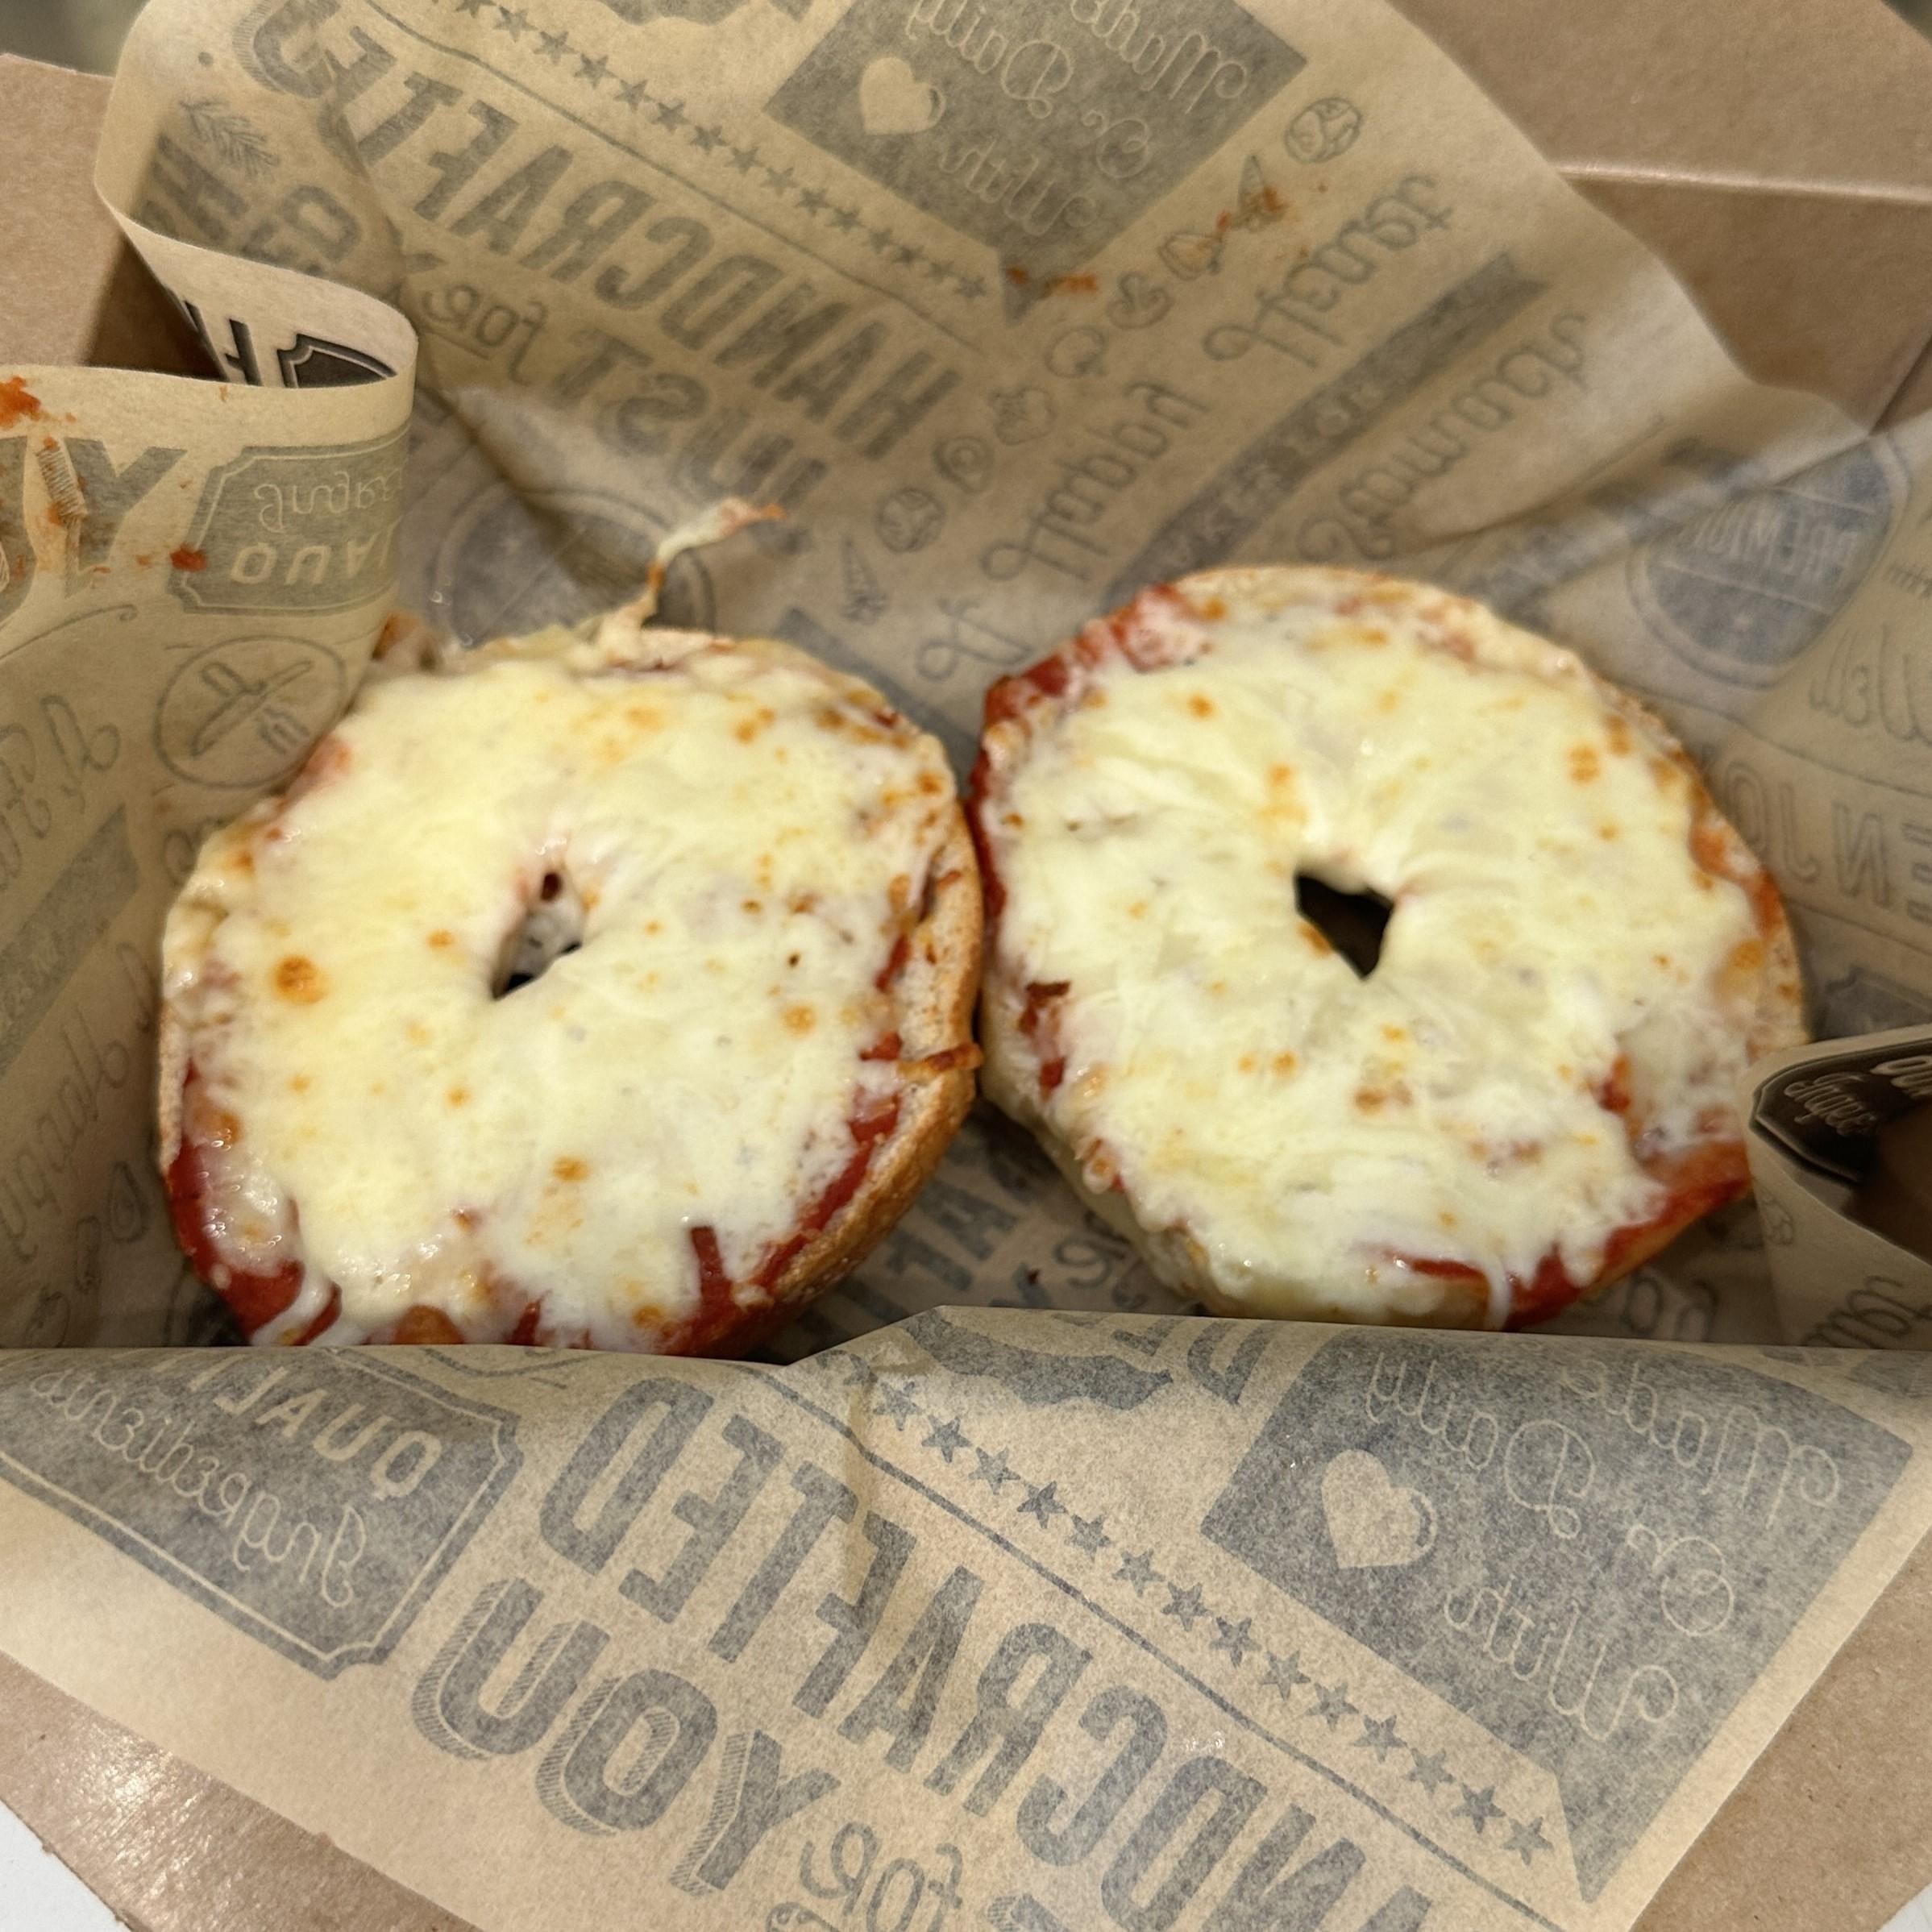 The Cheese Pizza Bagel